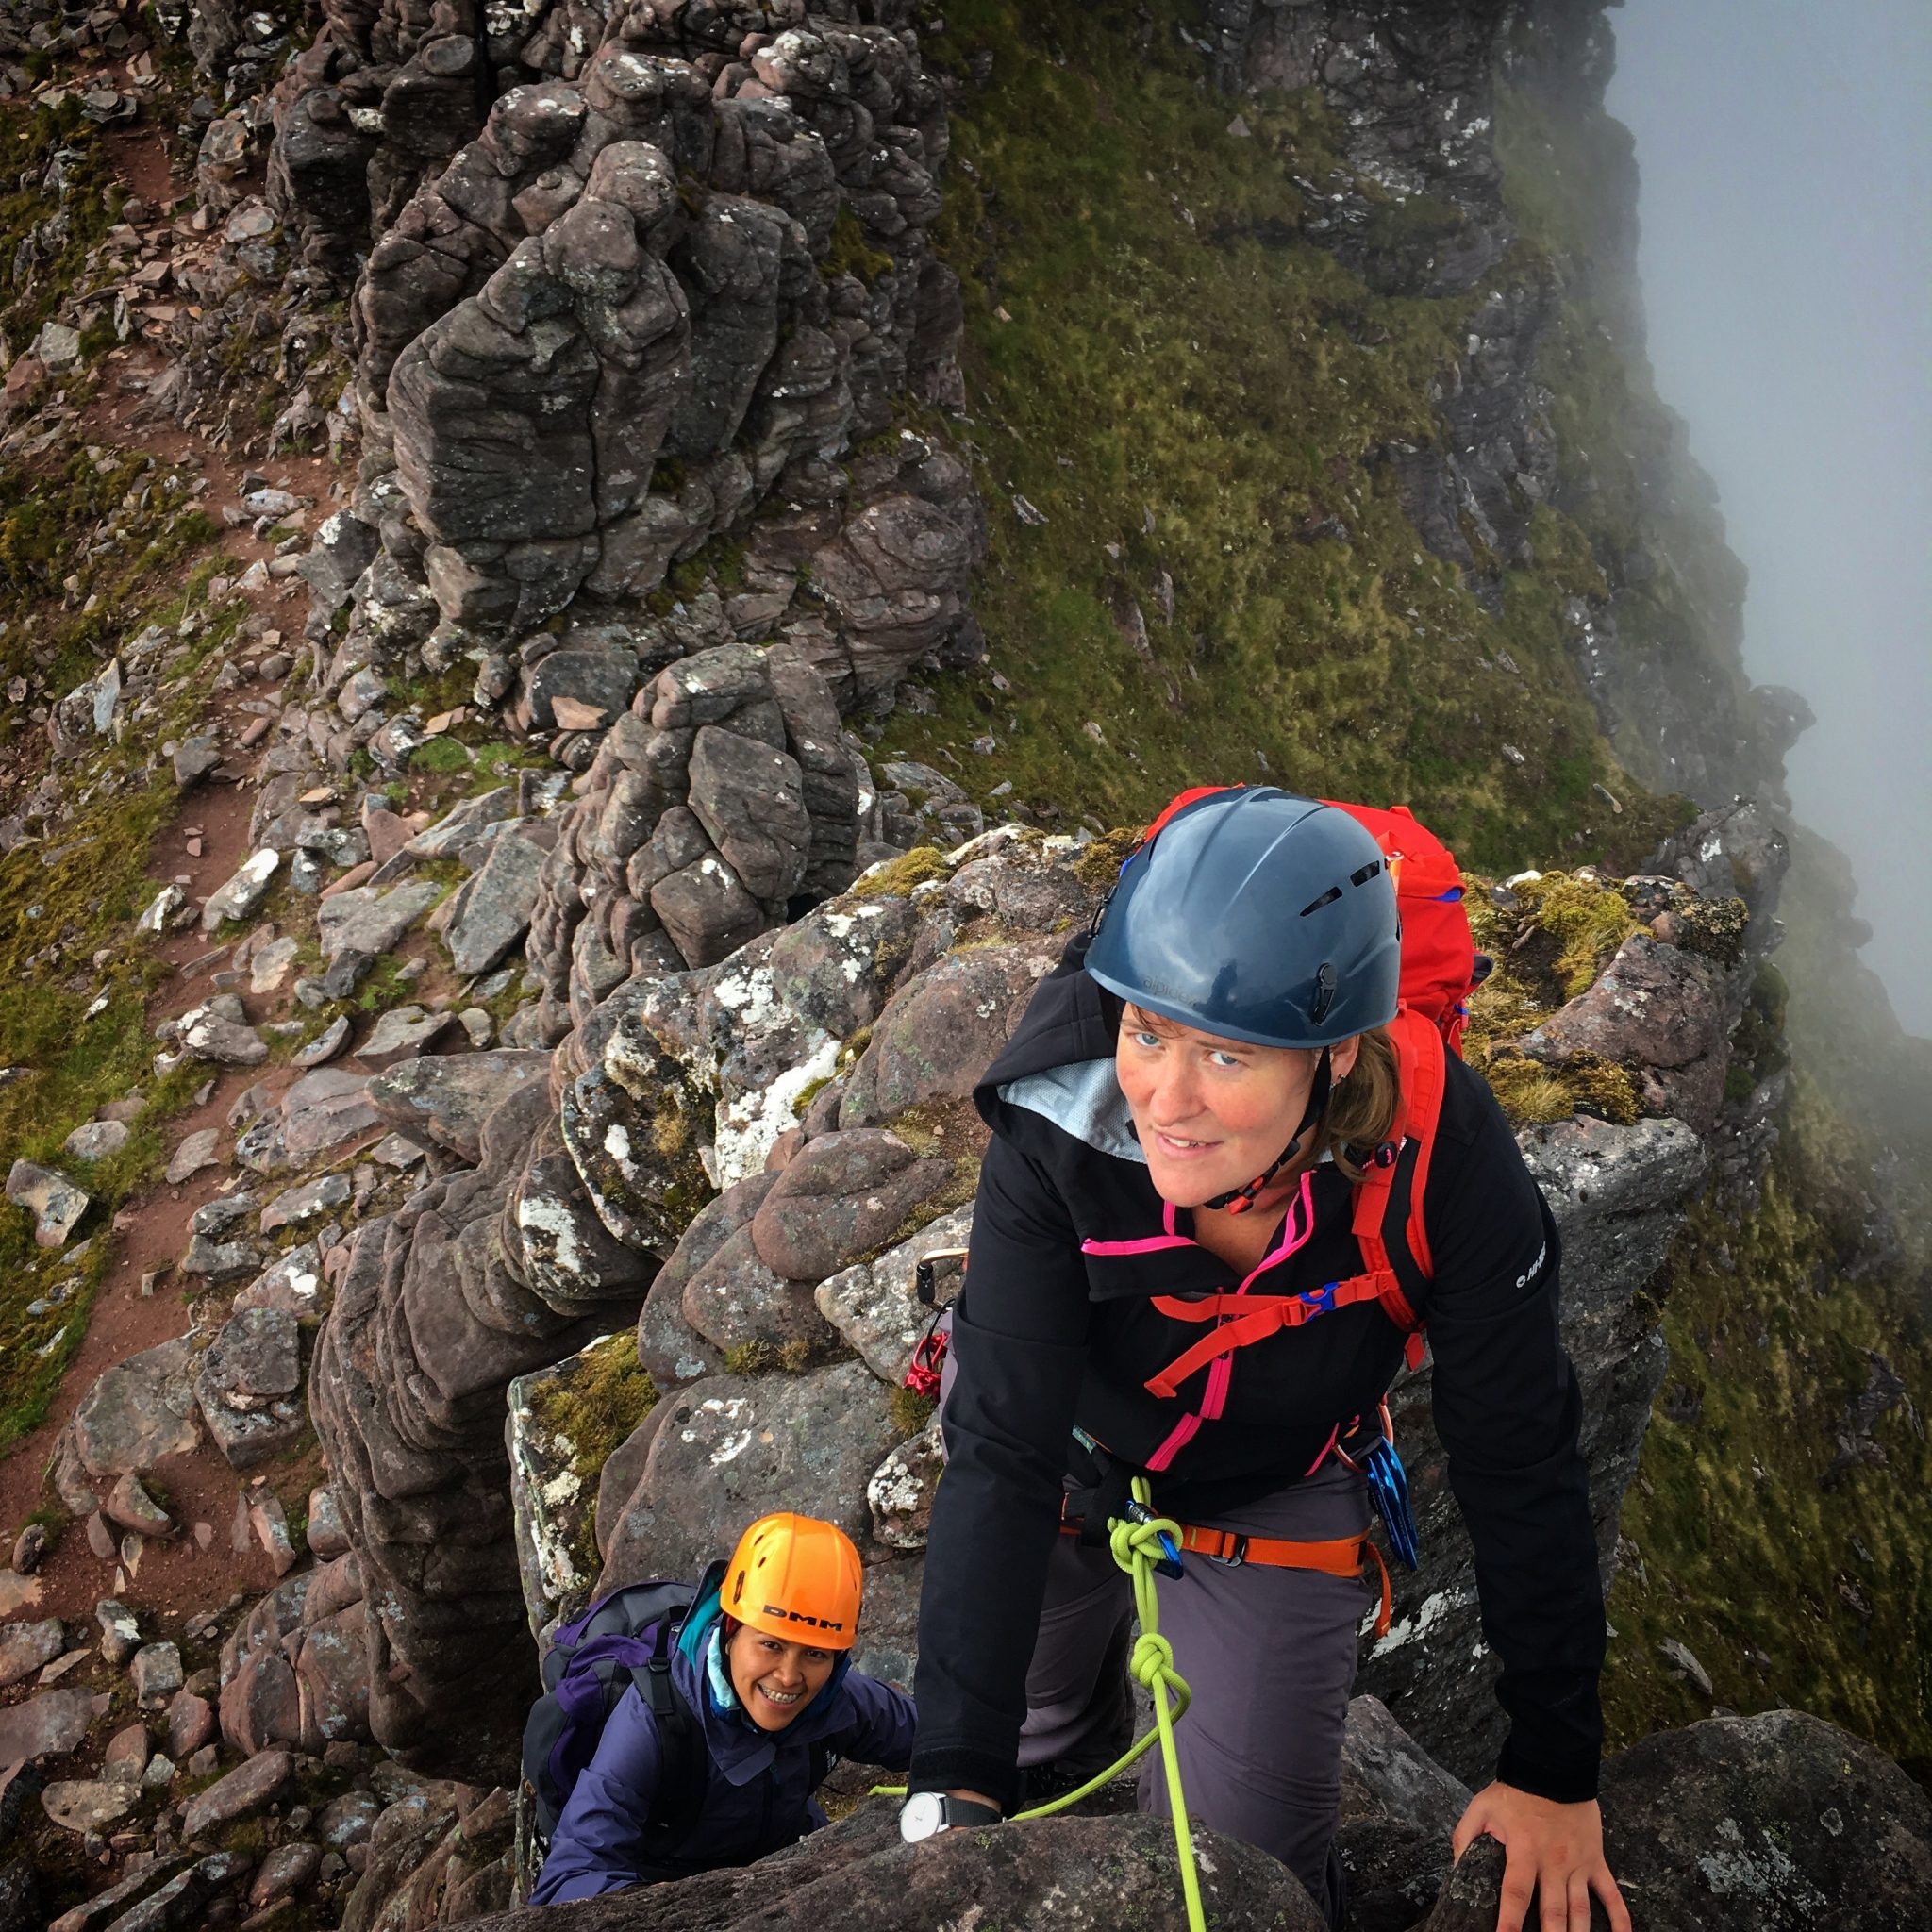 Scramblers traversing the Corrag Bhuidhe pinnacles on An Teallach during a mountaineering course